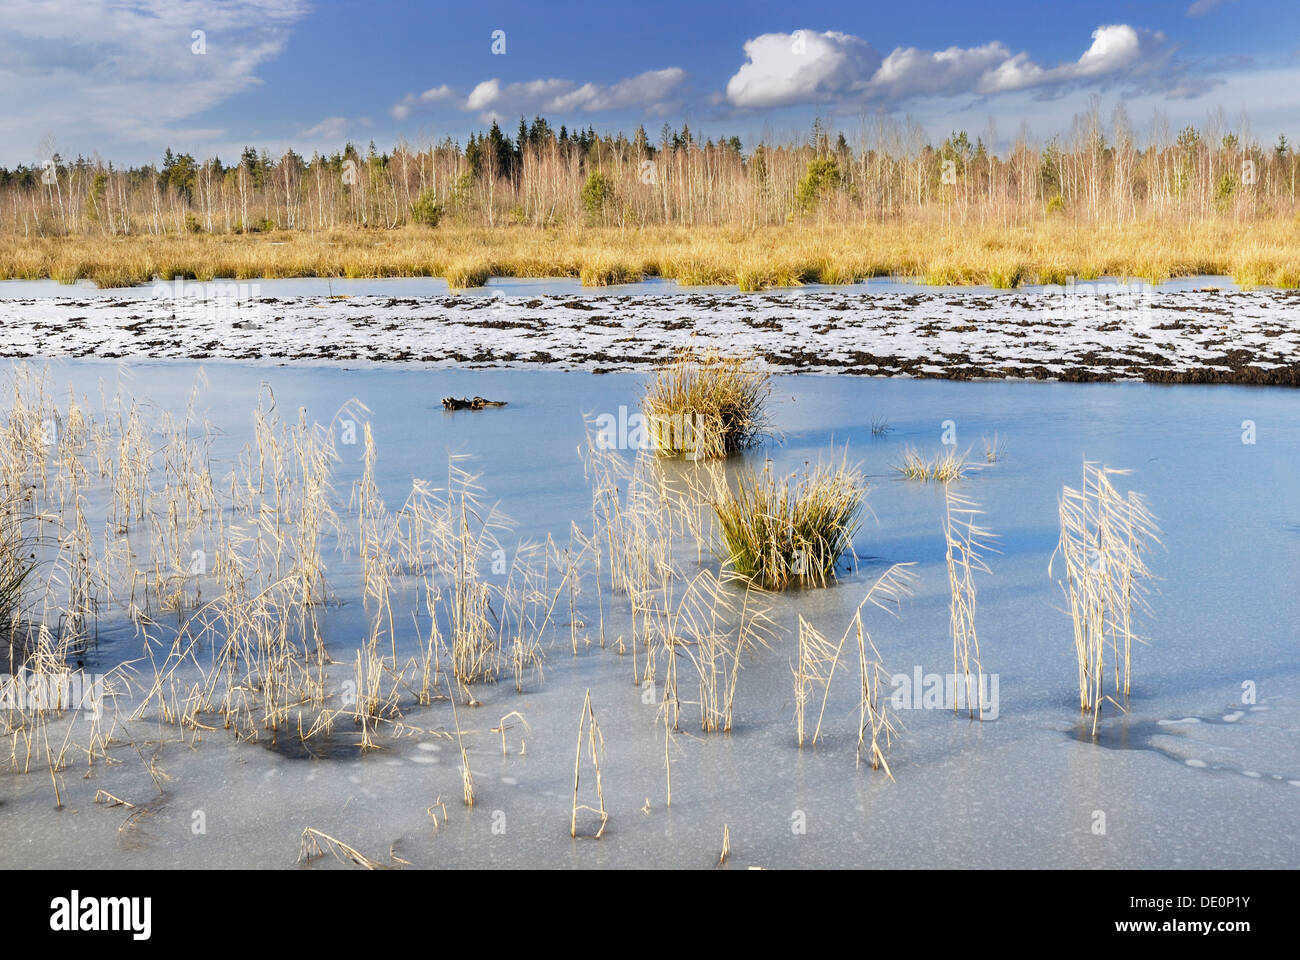 Reeds and rushes in a frozen moorland pond near Rosenheim, Inntal valley, Bavaria Germany, Europe Stock Photo